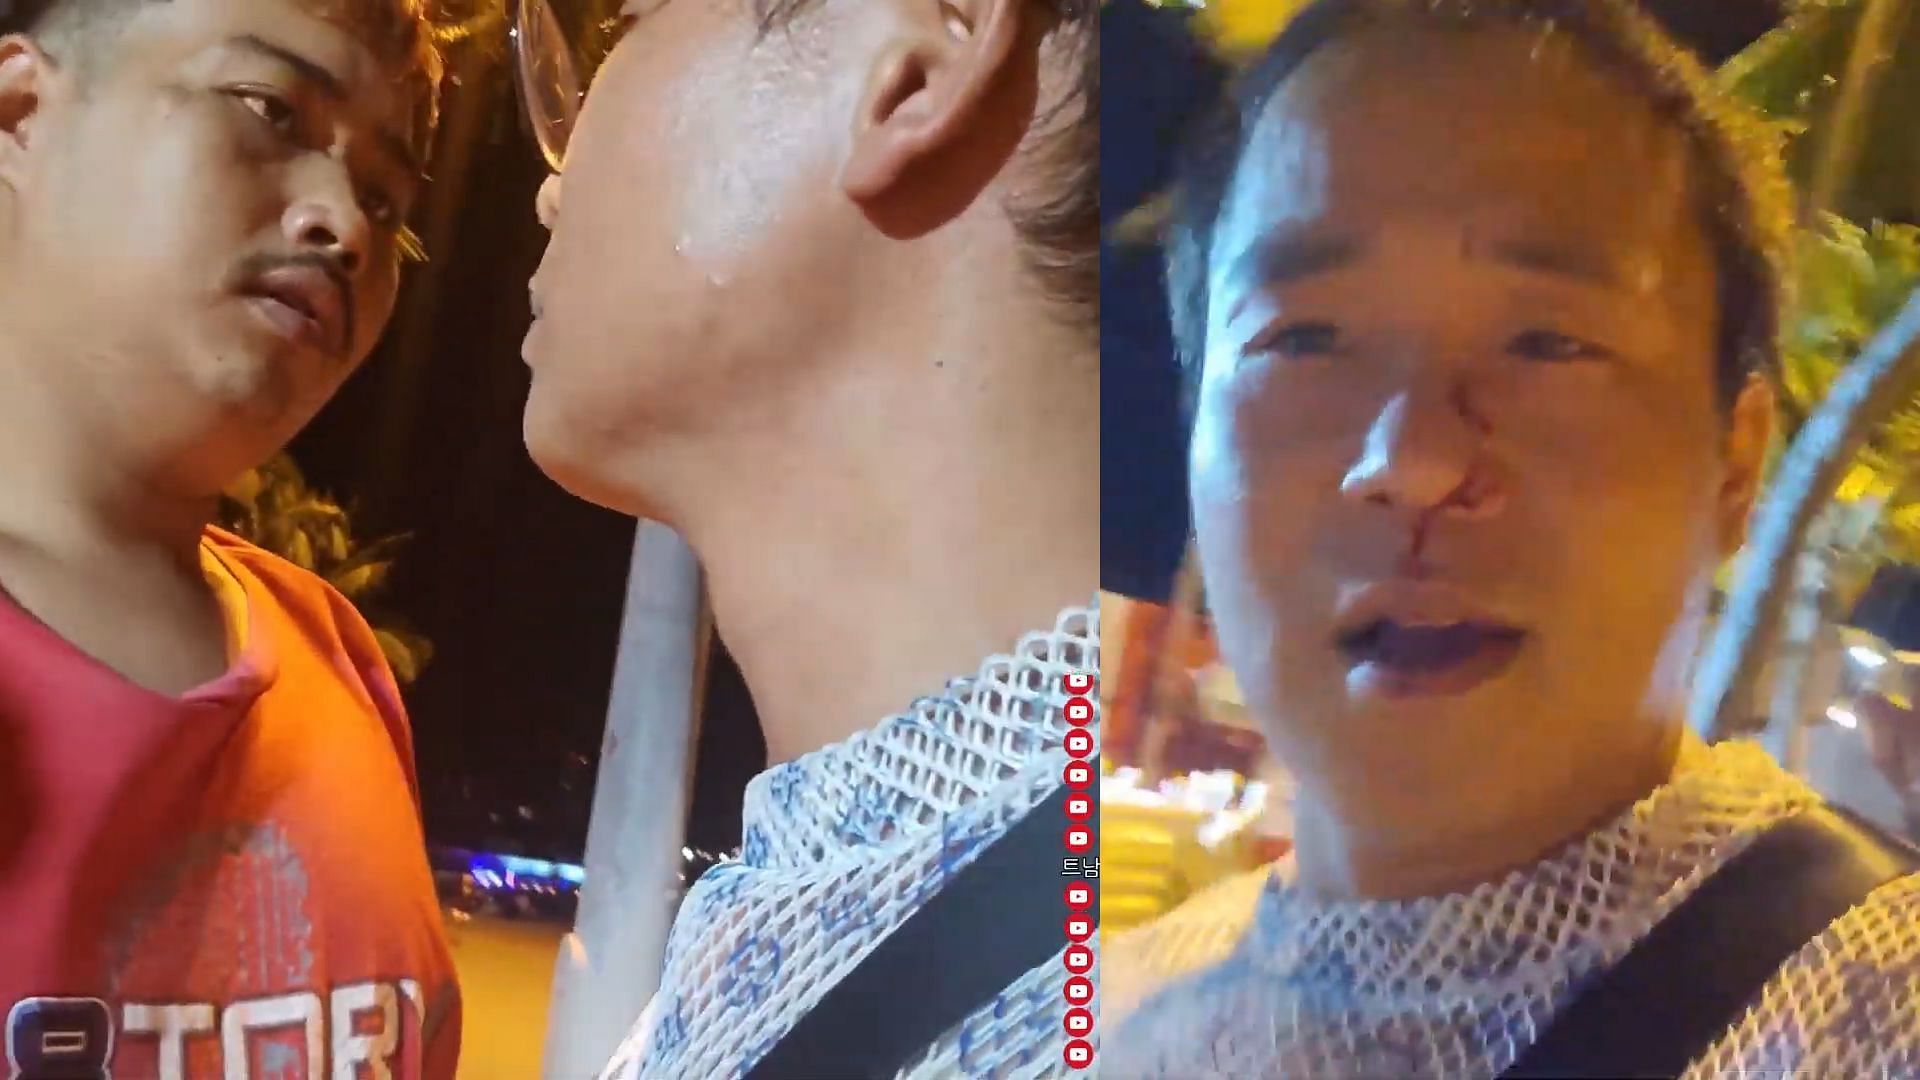 IRL streamer gets attacked in Thailand (Image via 시수기릿[girit]/YouTube)